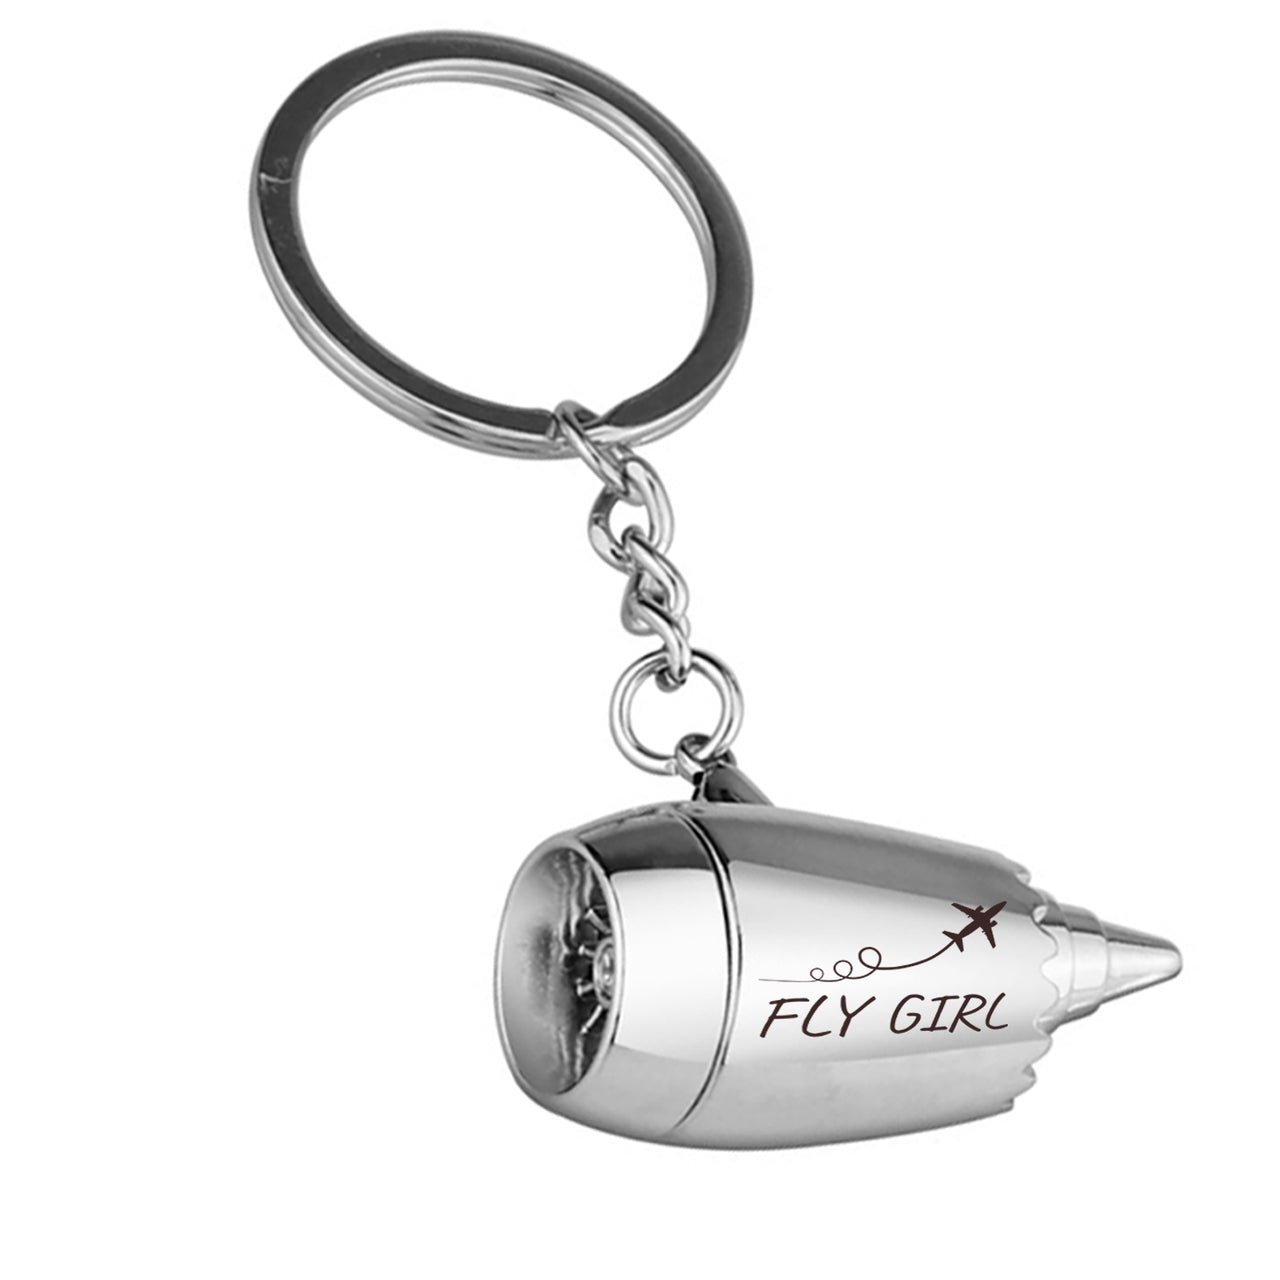 Just Fly It & Fly Girl Designed Airplane Jet Engine Shaped Key Chain